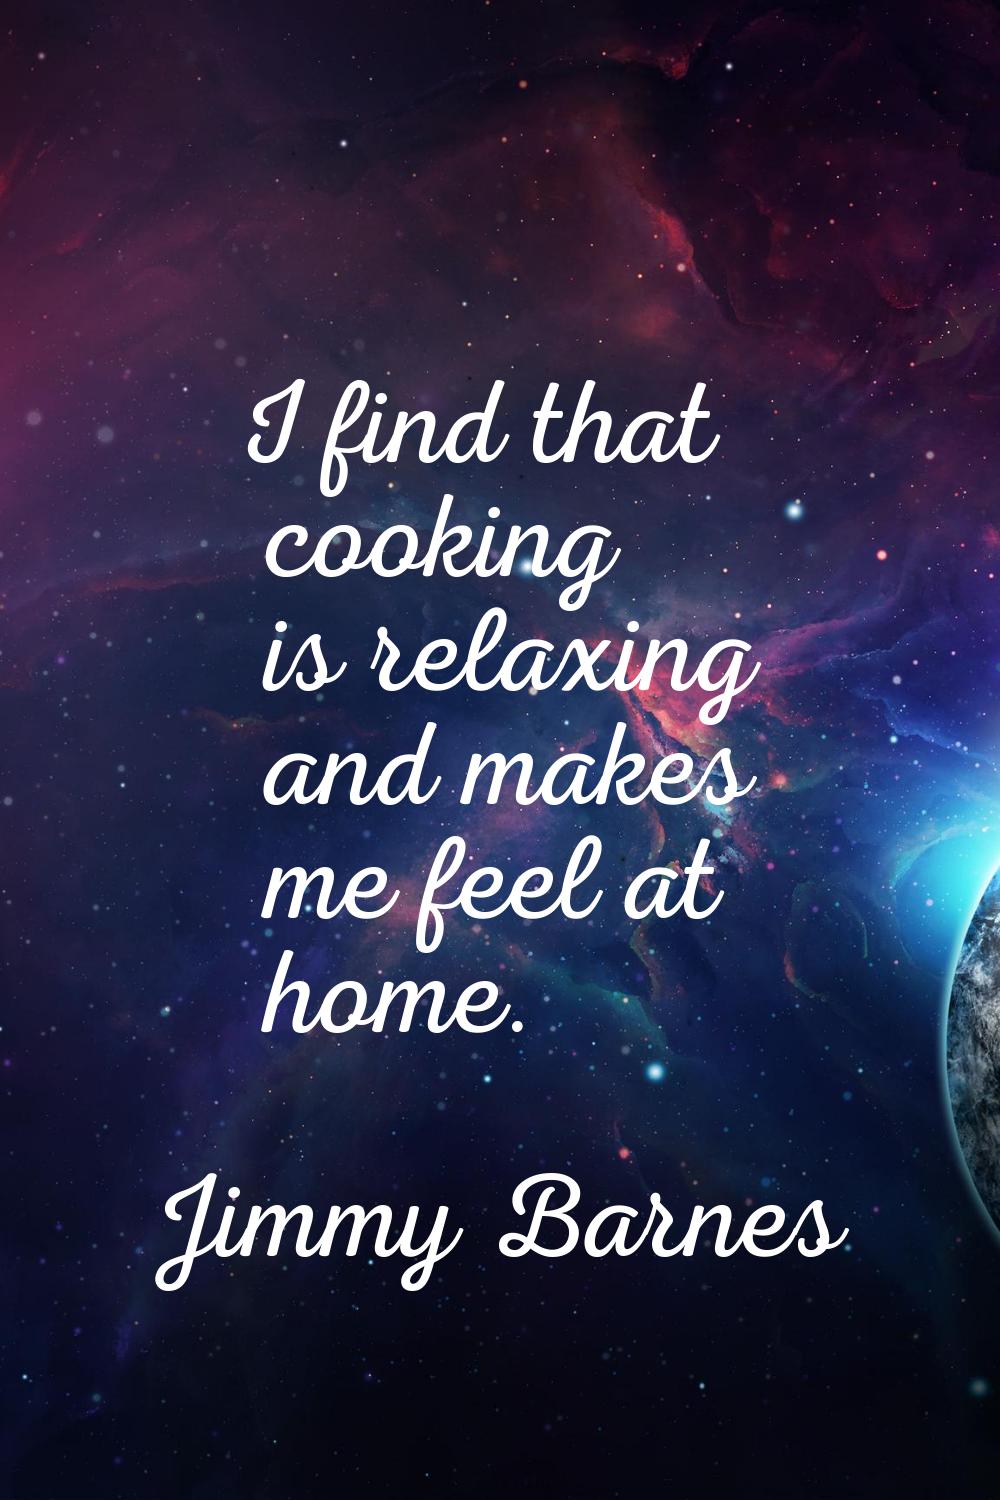 I find that cooking is relaxing and makes me feel at home.